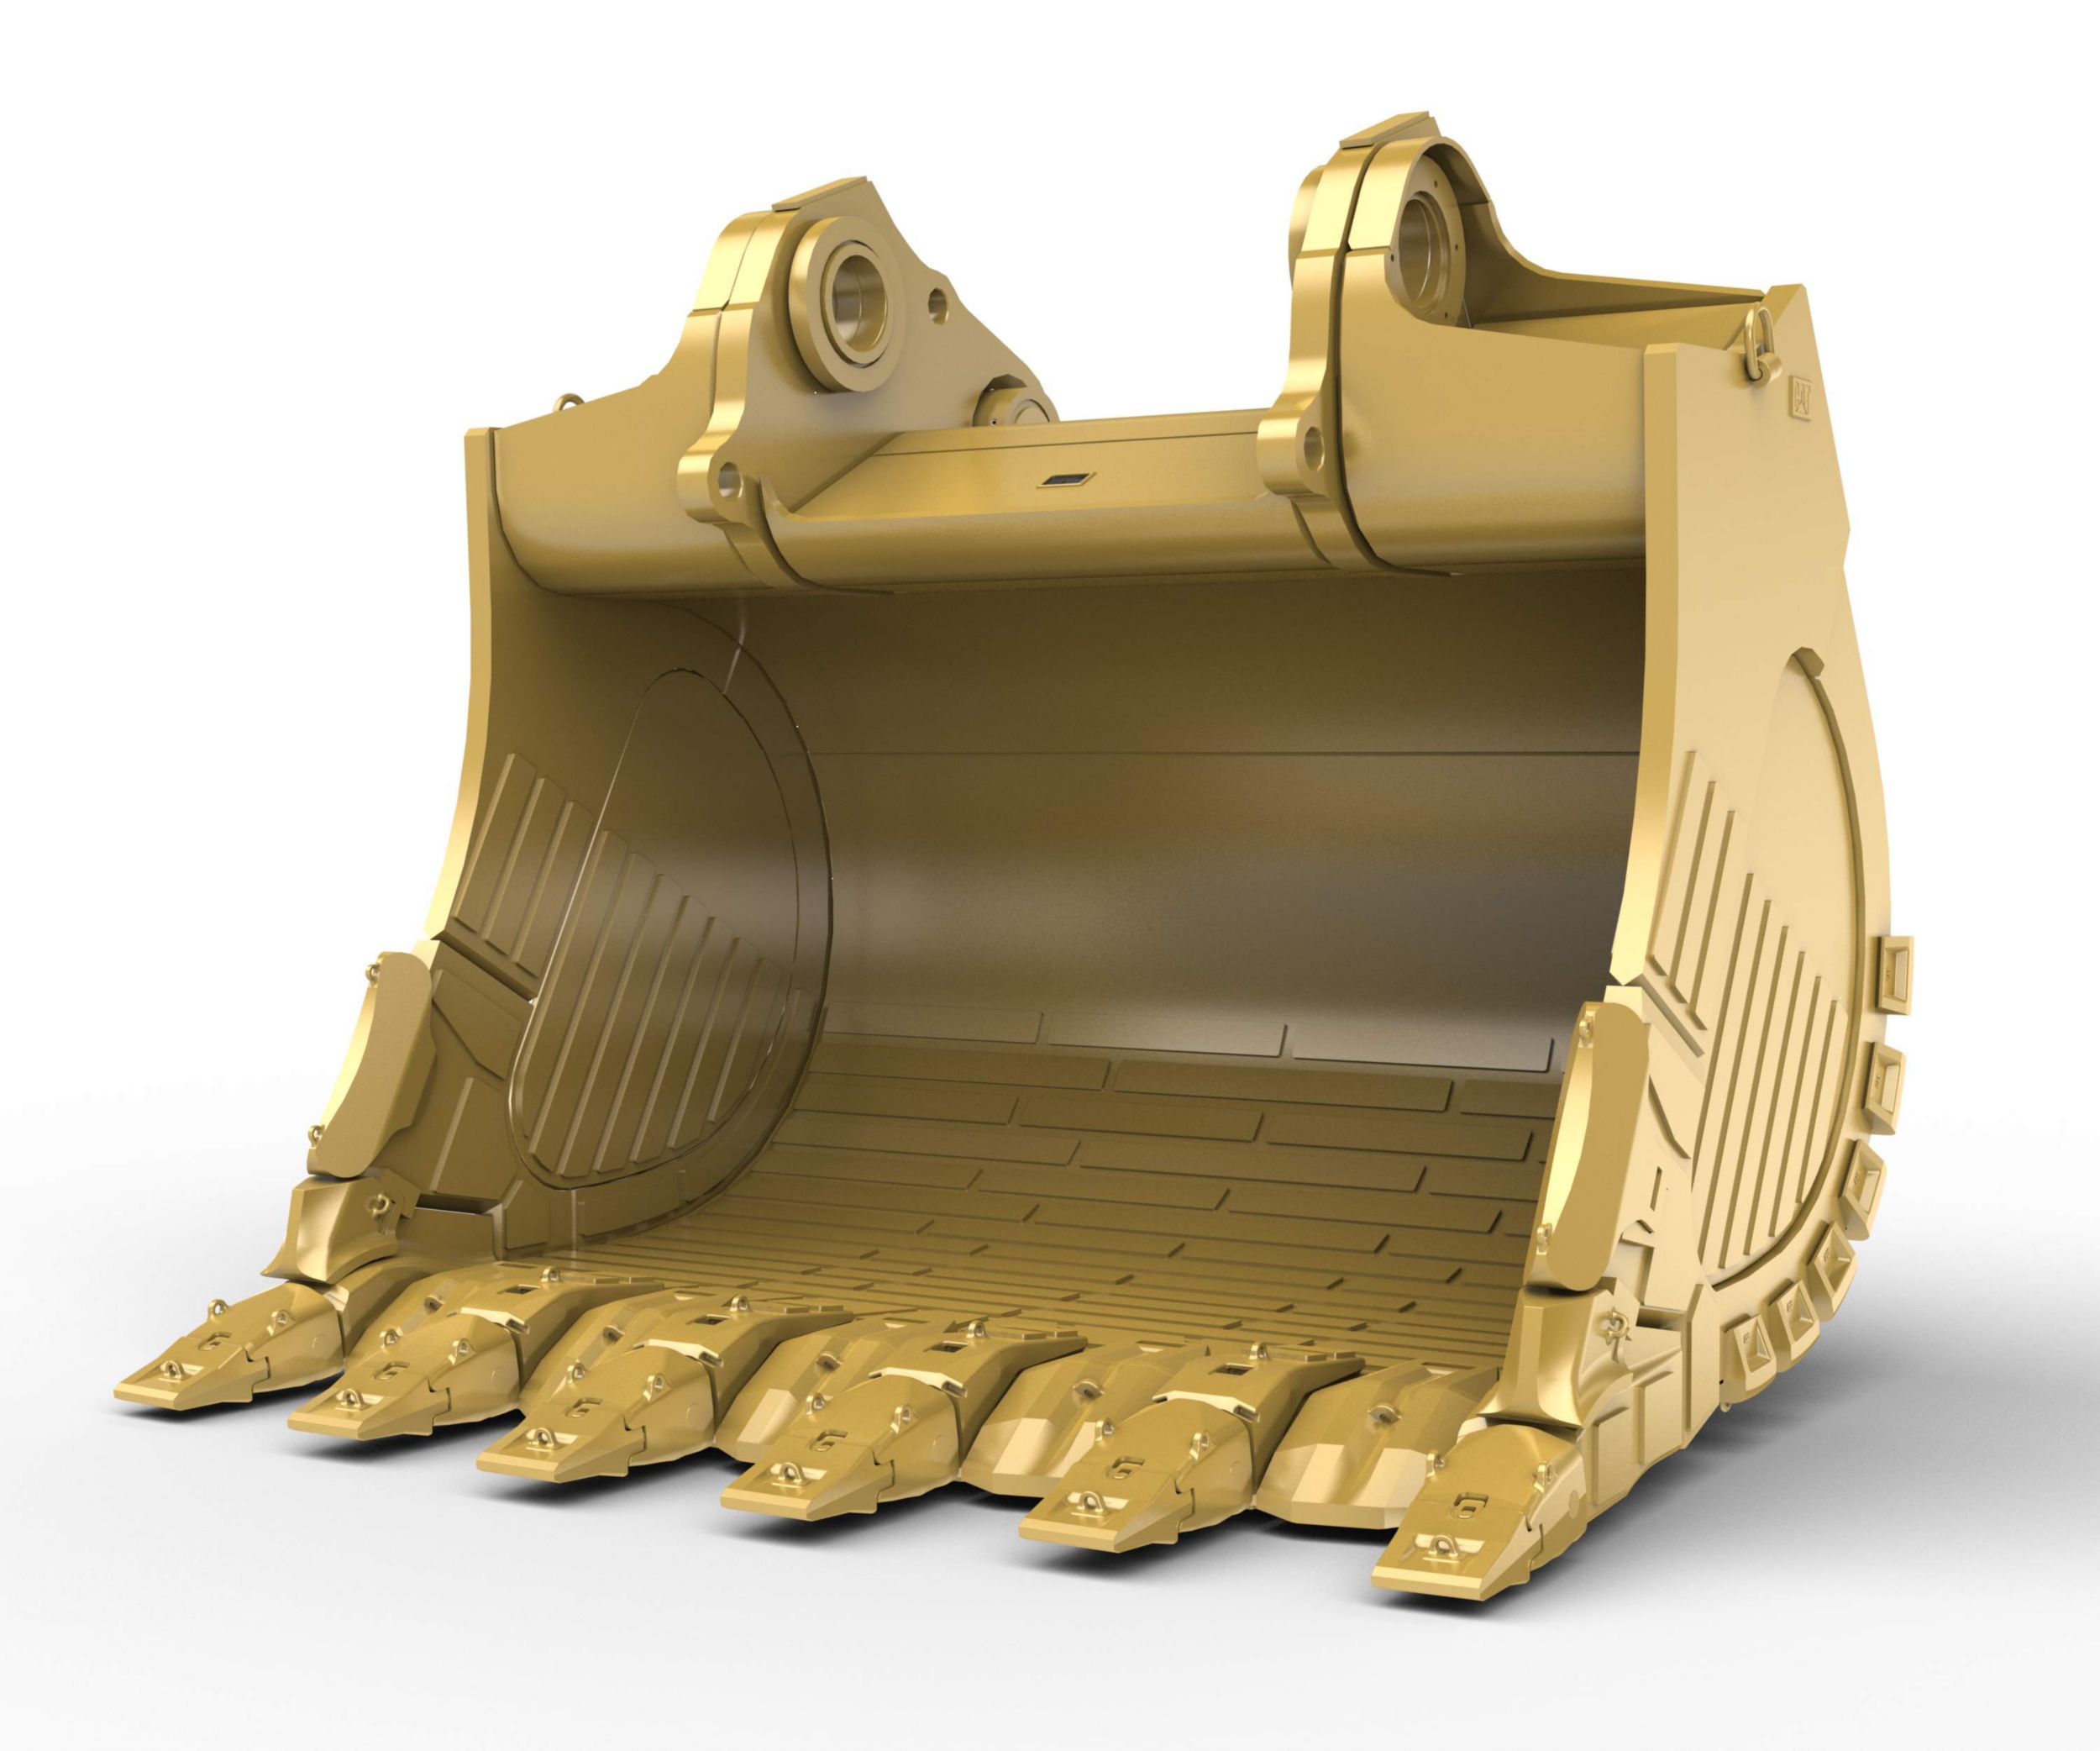 25m³ (32.7yd³) Iron Ore bucket for the 6060 Hyd Mining Shovel>